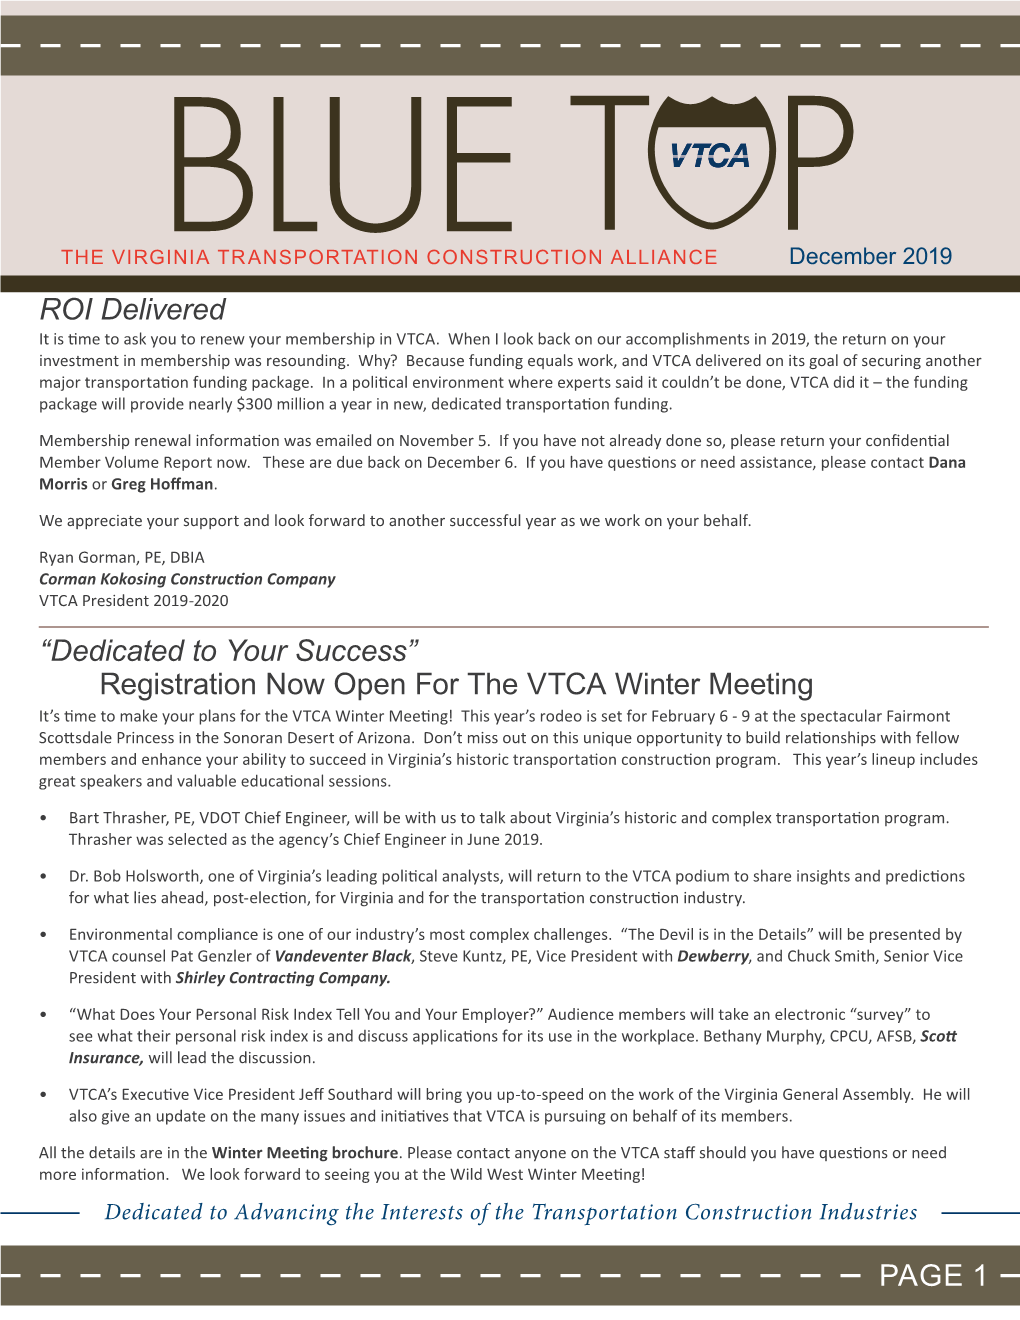 Registration Now Open for the VTCA Winter Meeting ROI Delivered